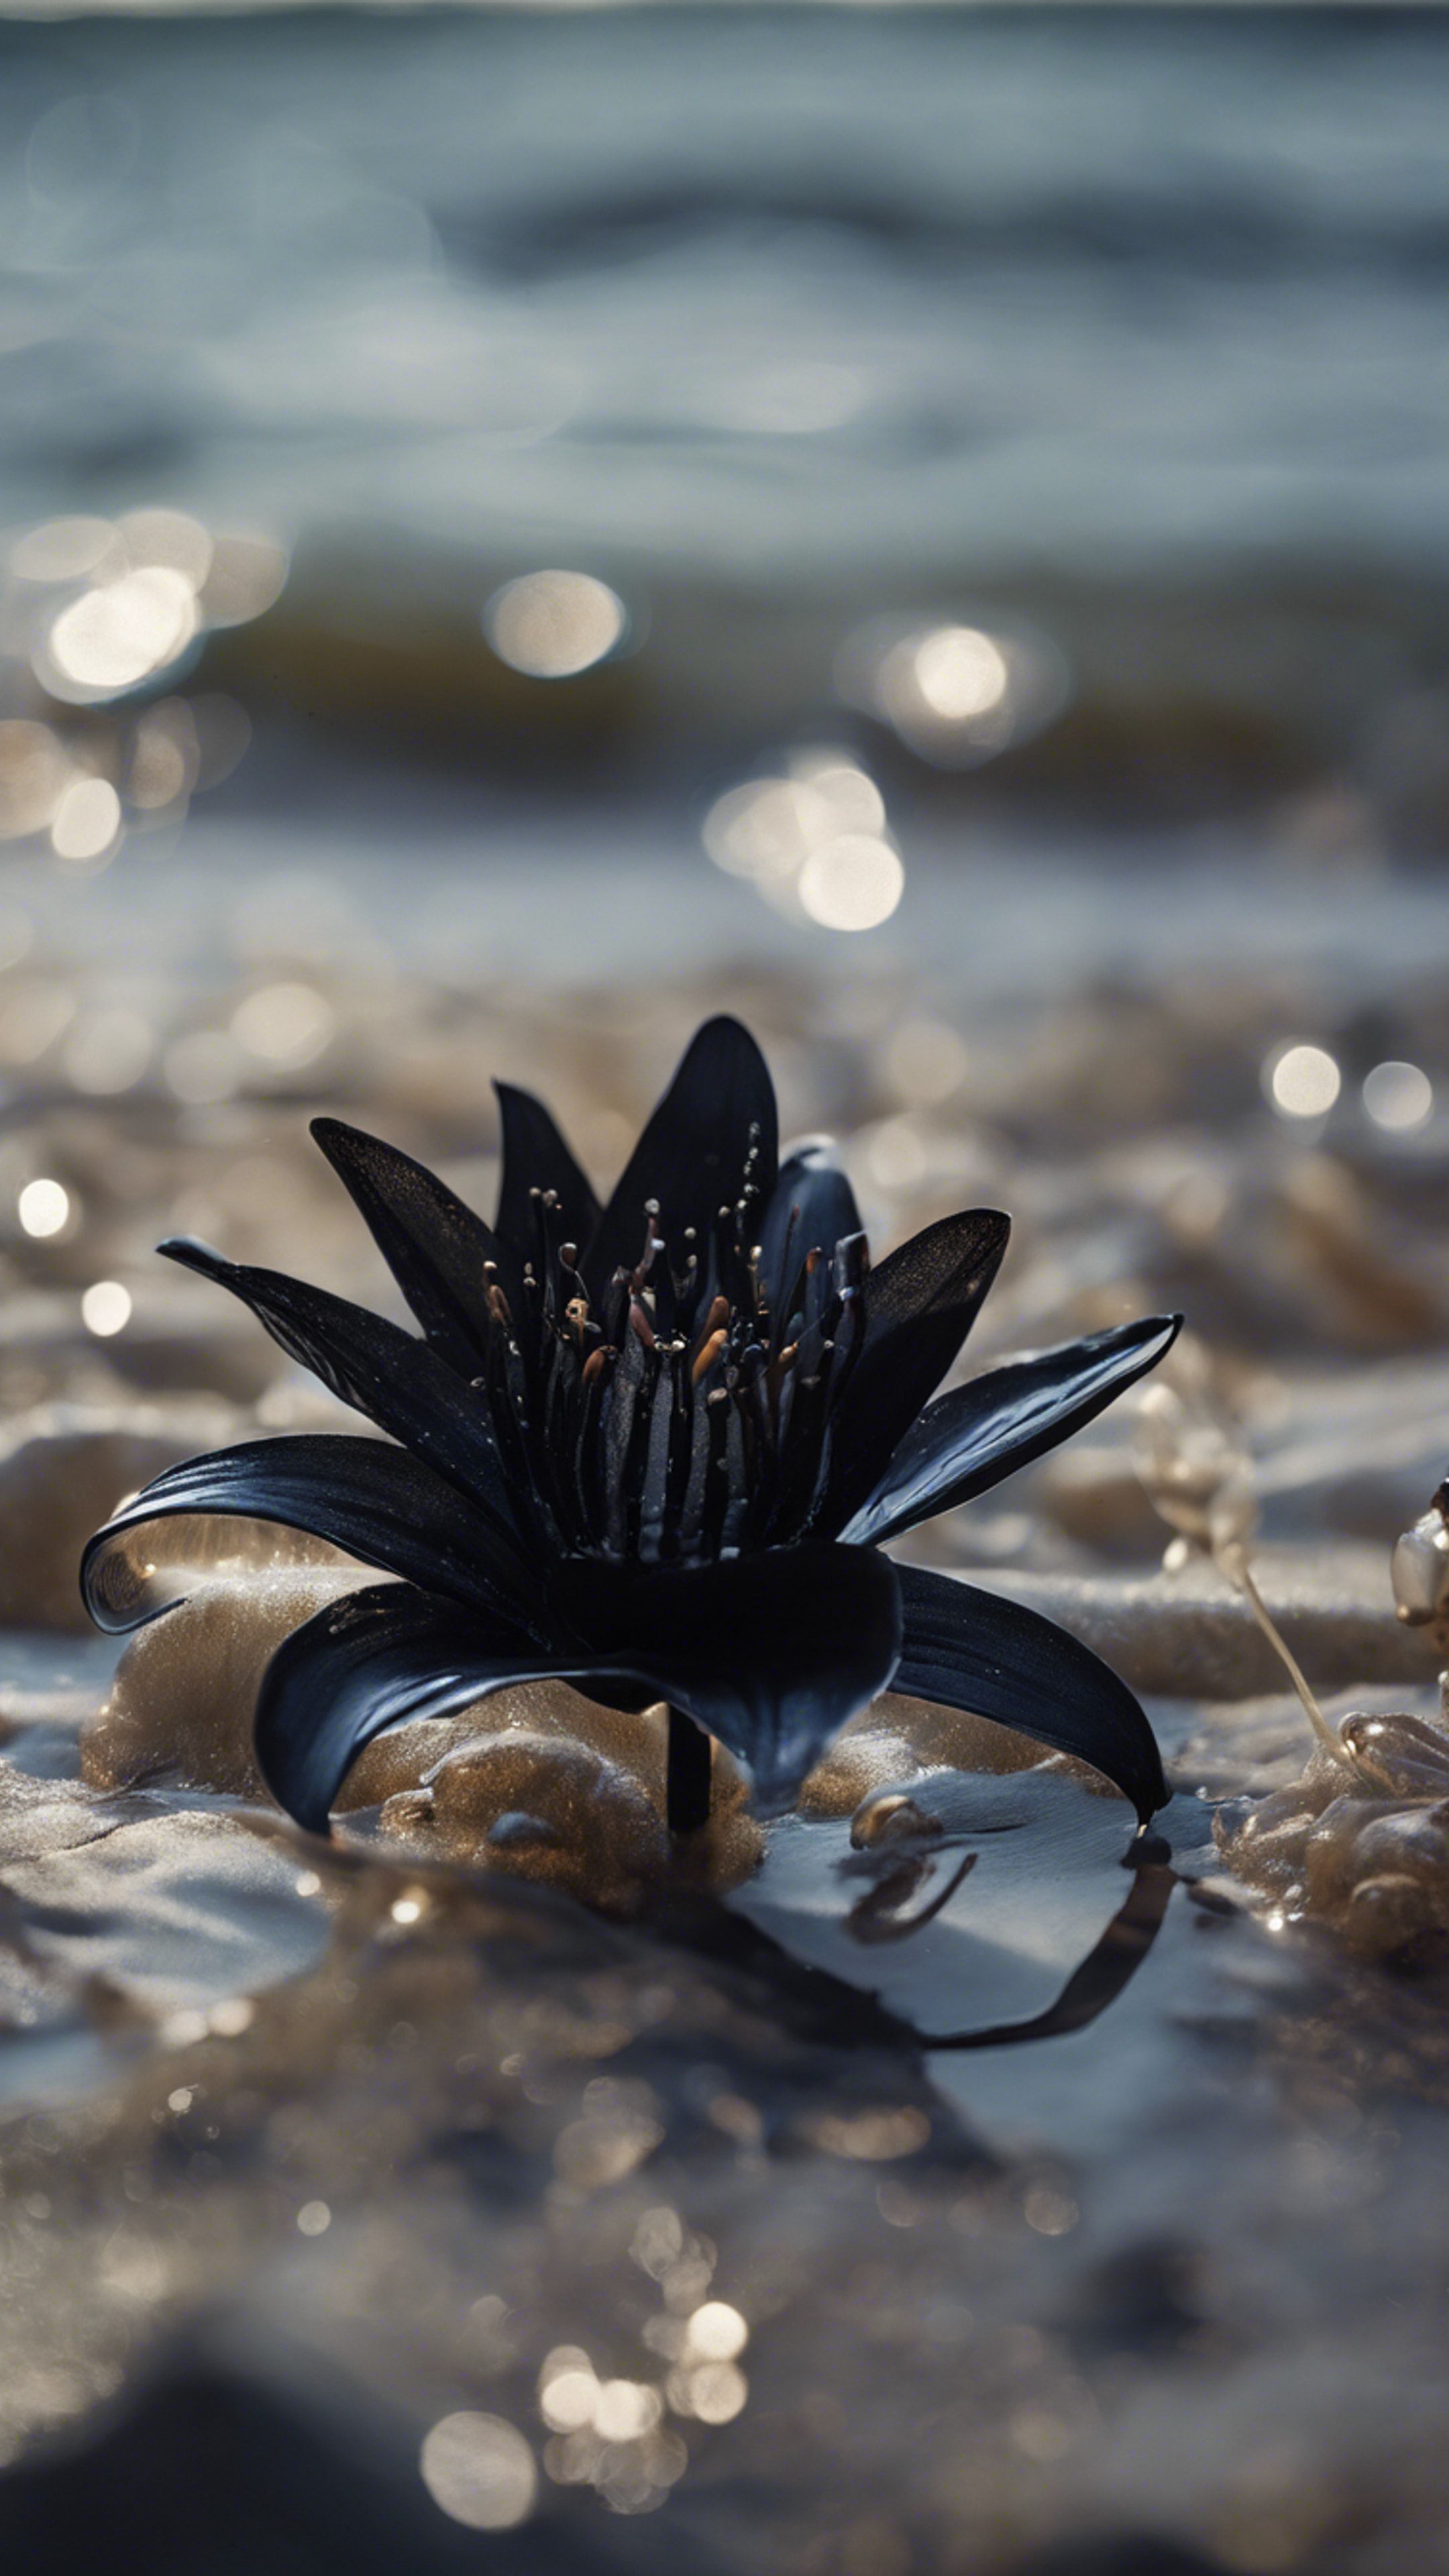 A black lily hiding under the tide, revealed only when the ocean pulls away, revealing the dark secrets of the sea bed. Тапет[3833c30c18c941348380]